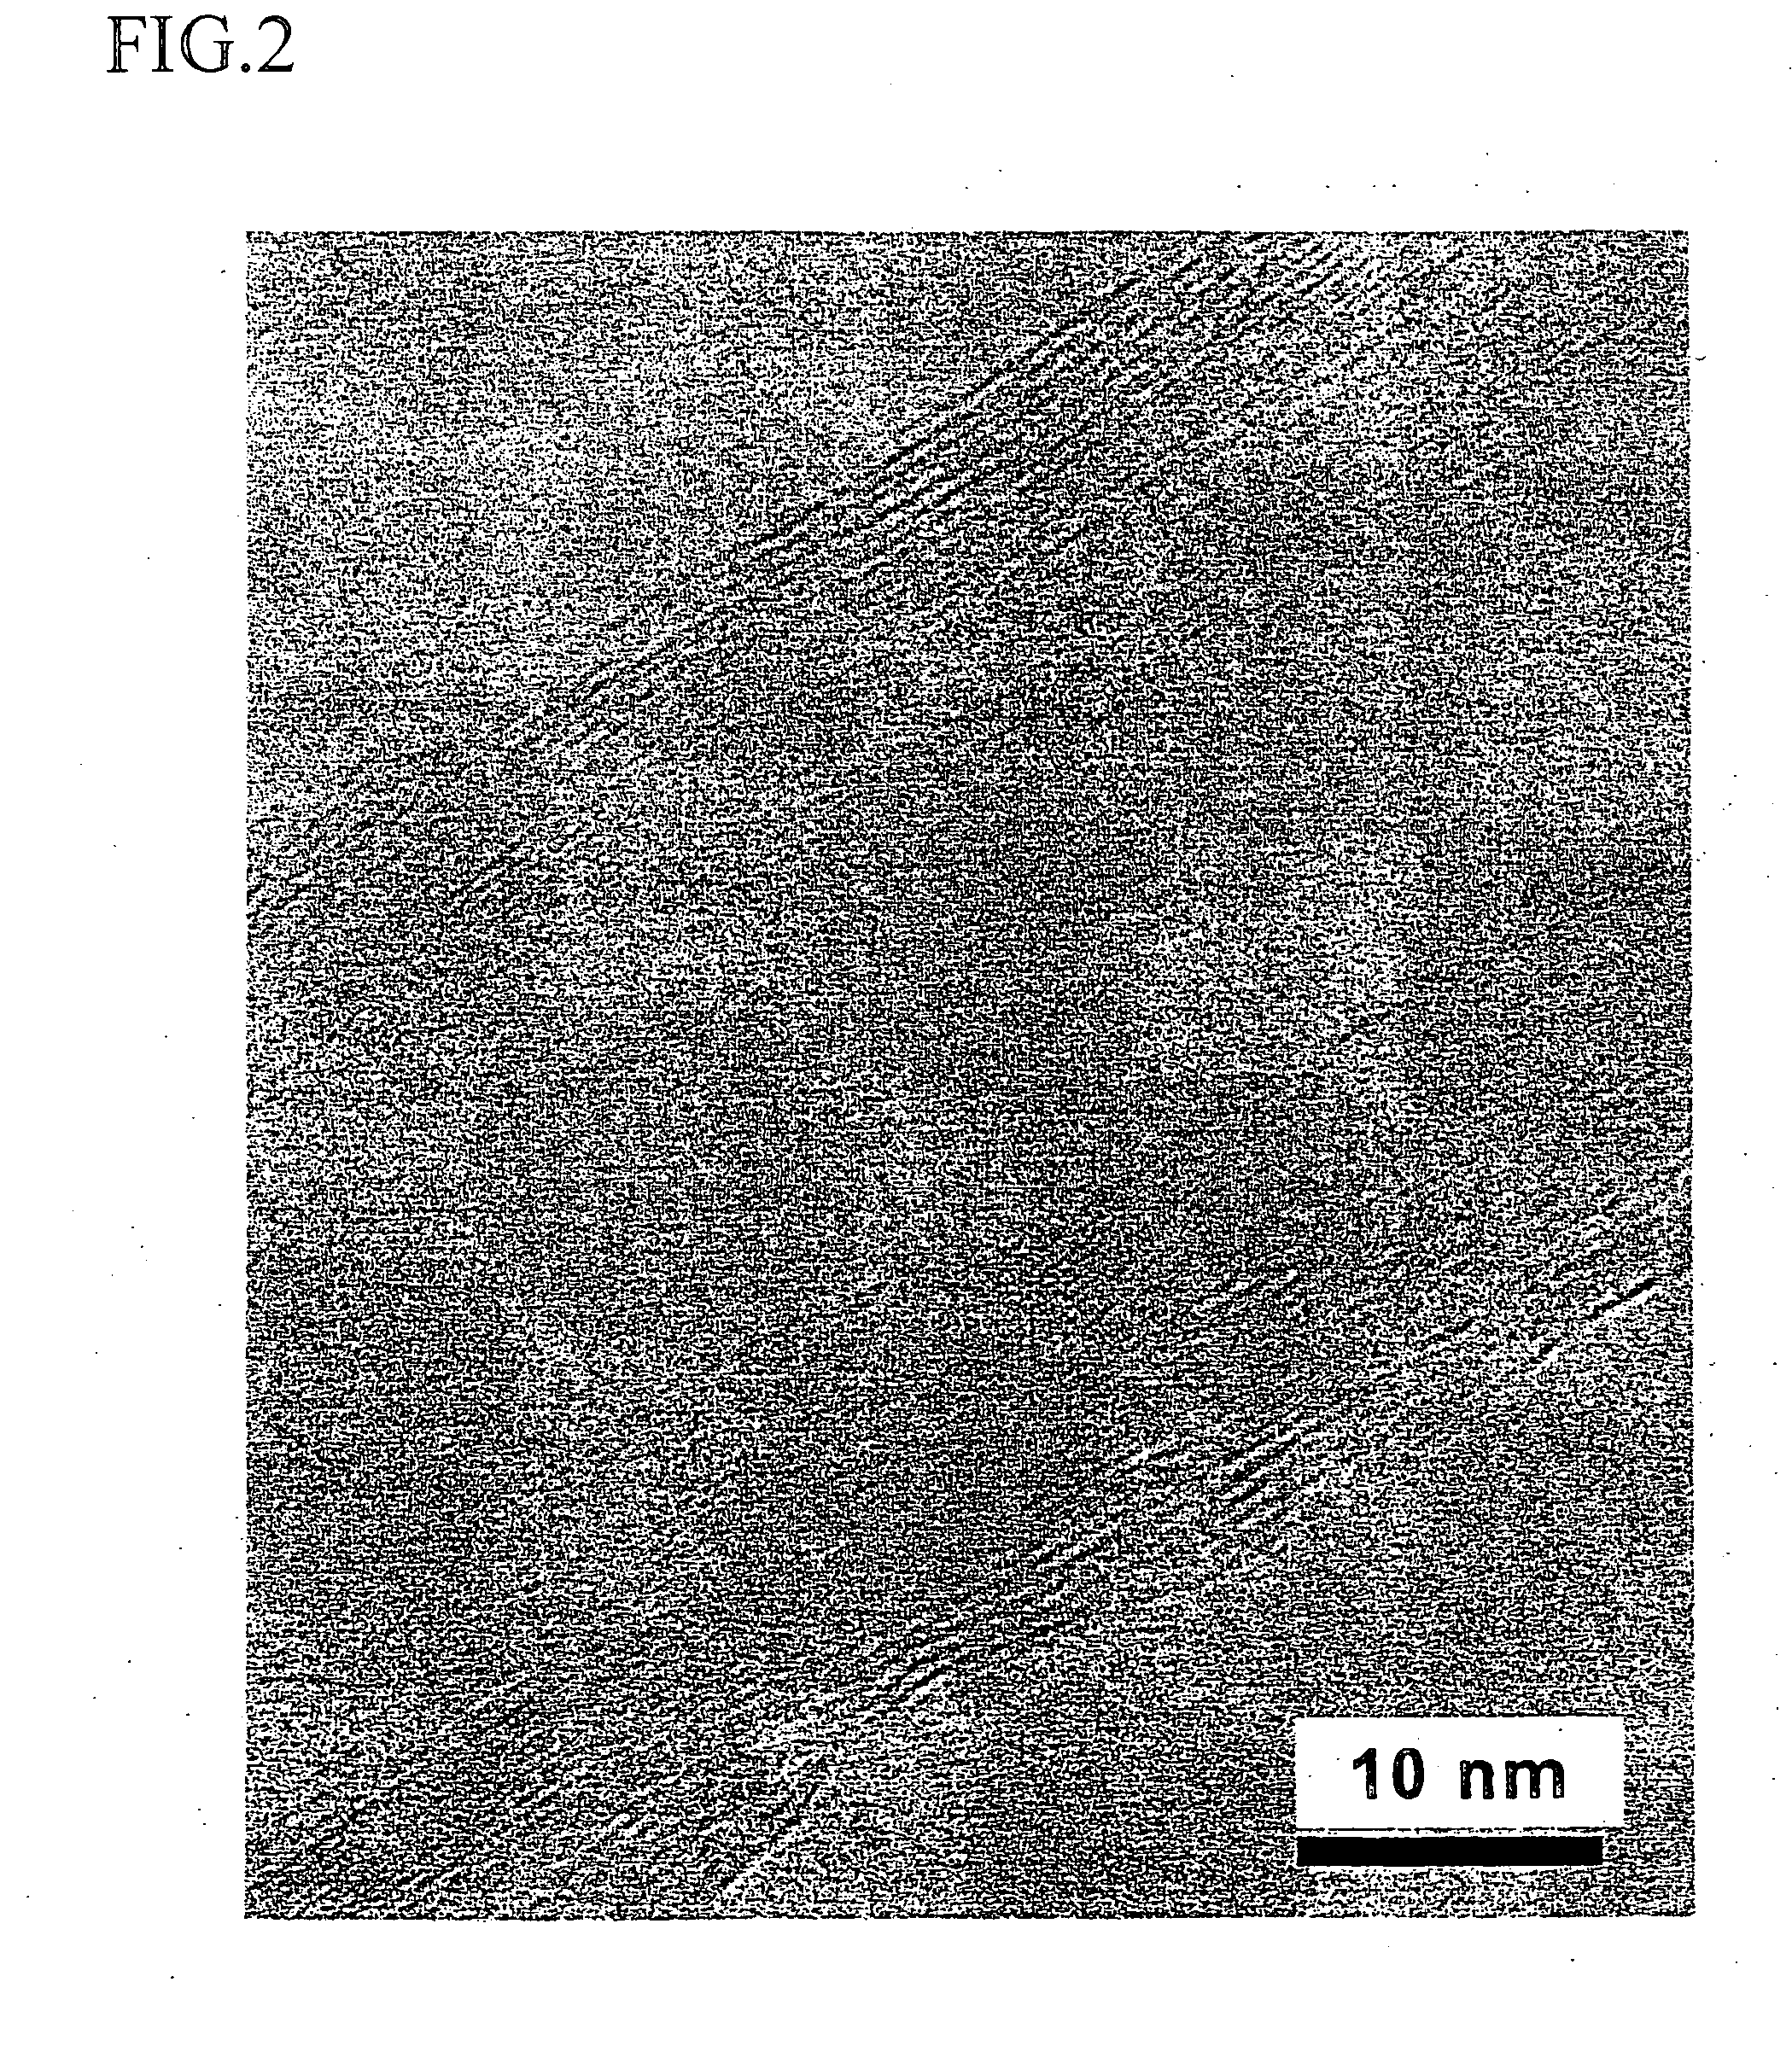 Carbon Nanotubes Aggregate, Method for Forming Same, and Biocompatible Material